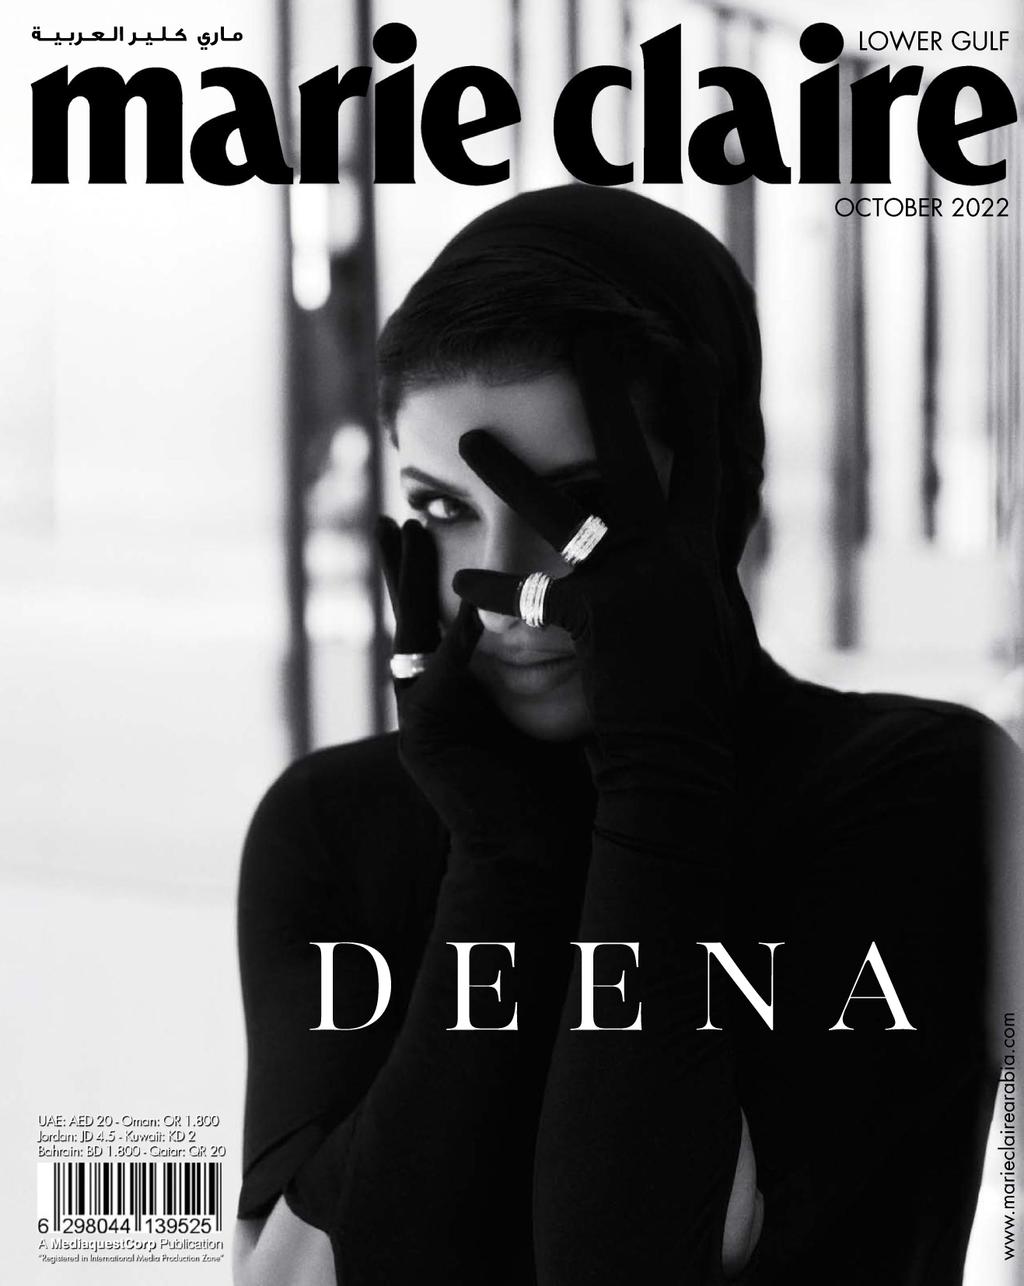 Marie Claire Lower Gulf October 2022 (Digital) - DiscountMags.com